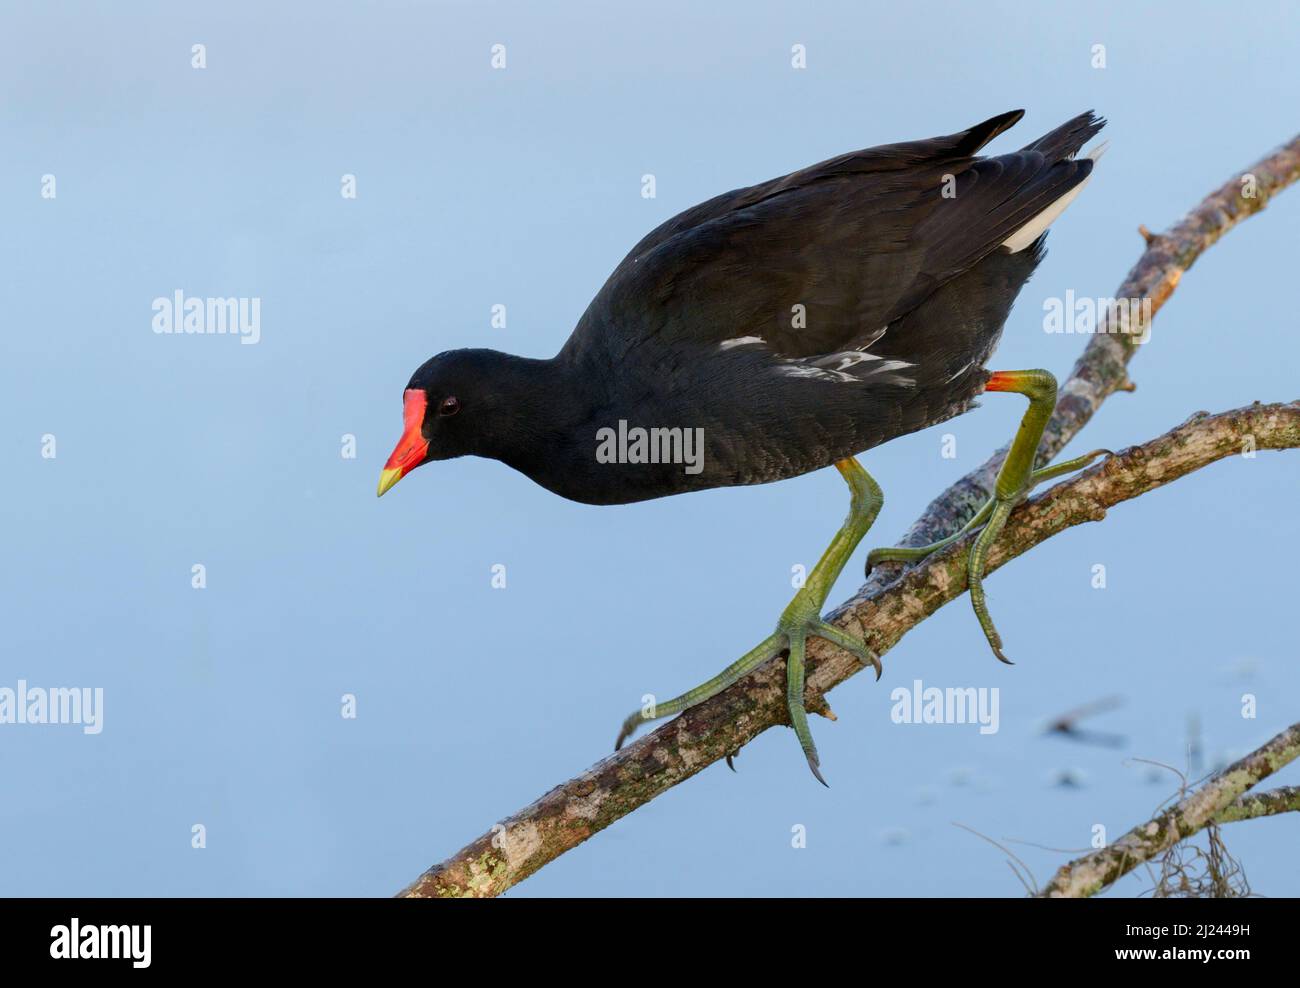 Common gallinule (Gallinula galeata) climbing tree branches over water, Brazos Bend State Park, Needville, Texas, USA. Stock Photo